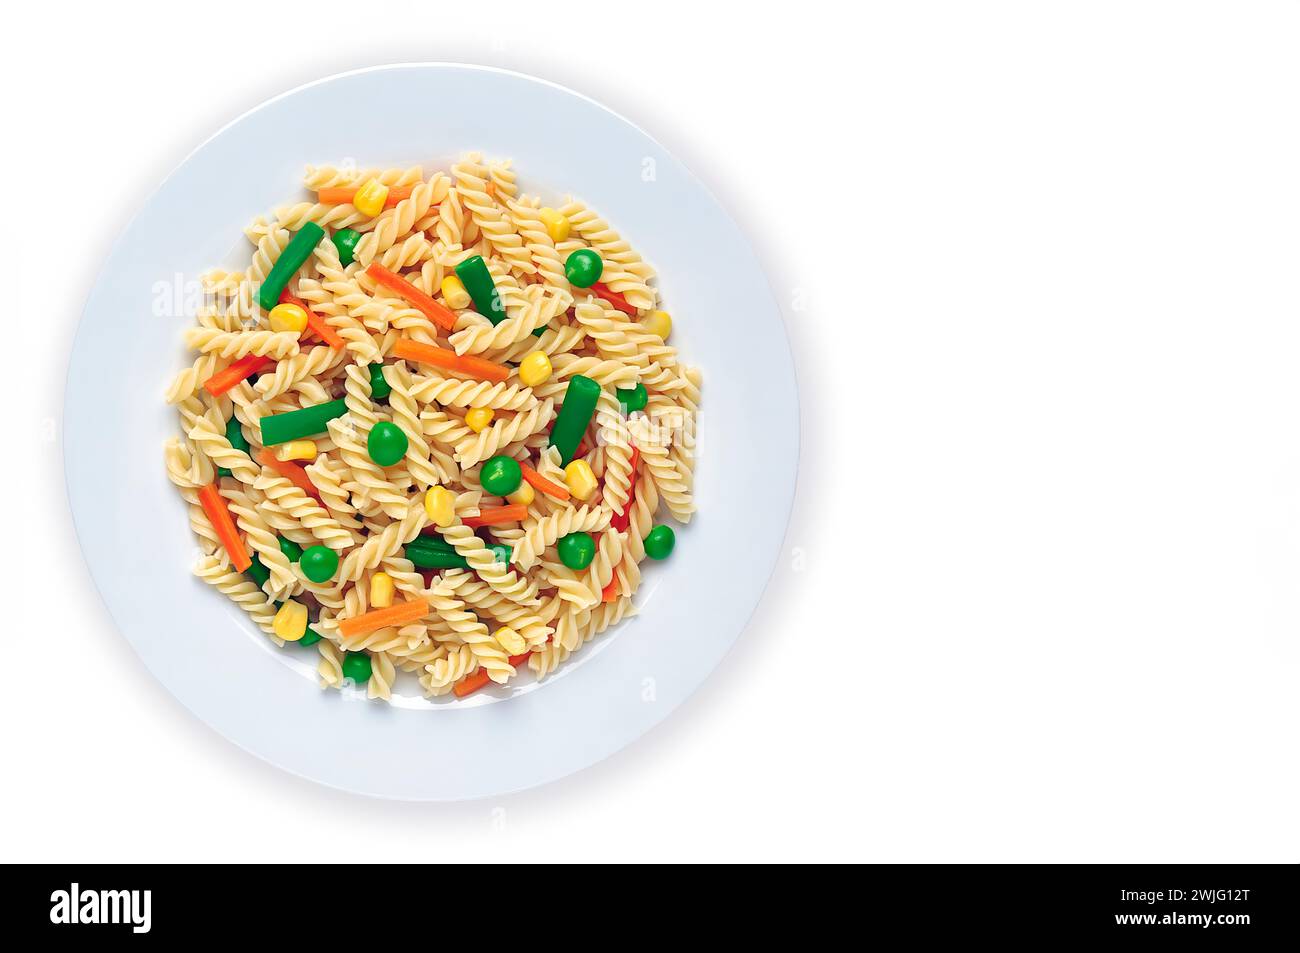 Still life with pasta dish with peas, green beans and carrots, on white background. Stock Photo